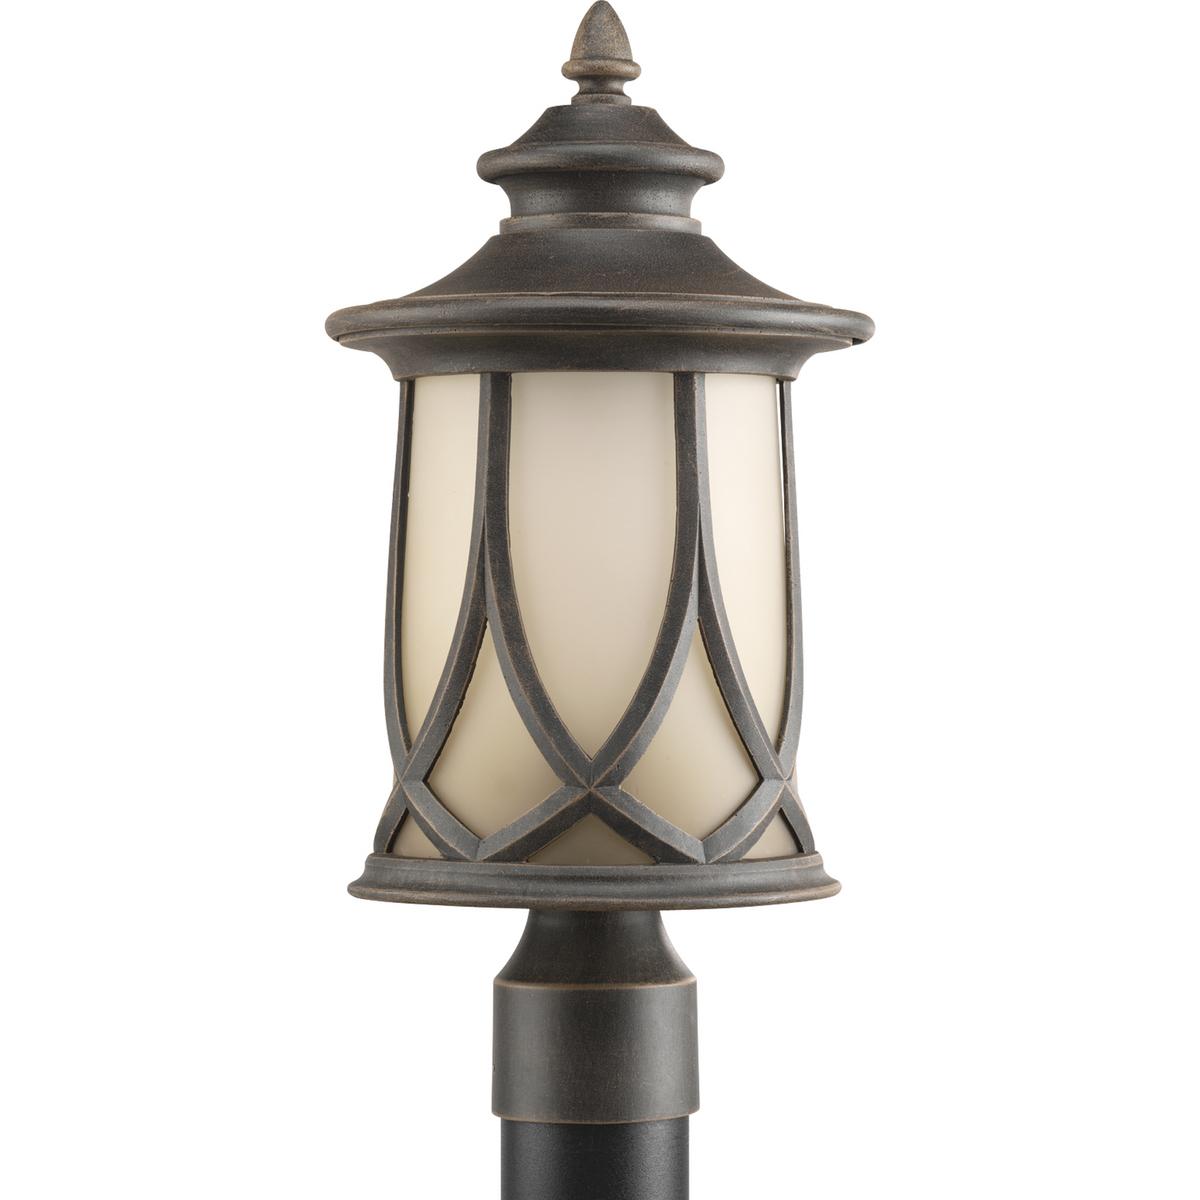 Hubbell P6404-122 Tudor styling meets prairie design. Gradual umber tint on glass shades. A woven cast pattern encases a casual profile. Large scale cast aluminum lantern feature a durable powder coat finish. One-light post lantern.  ; Gradual umber tint on glass shades. ;